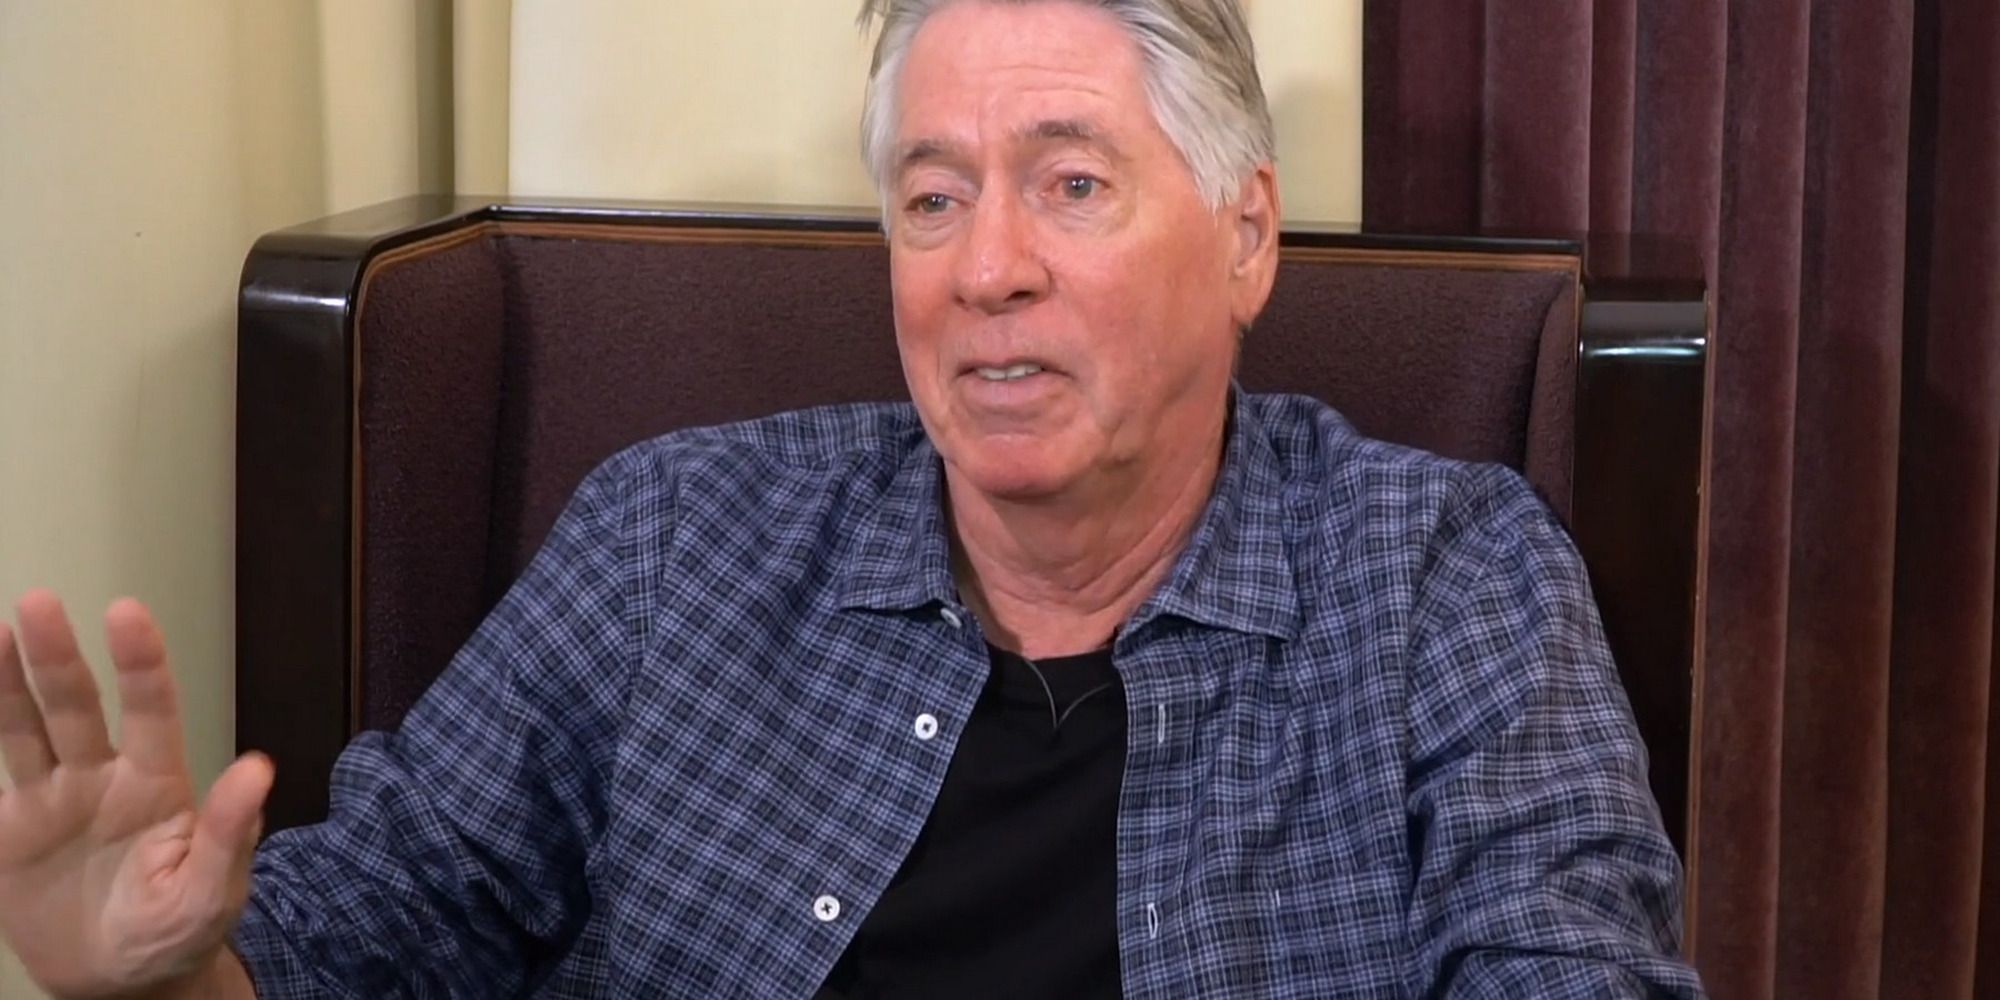 Alan Silvestri in an interview sitting on a couch